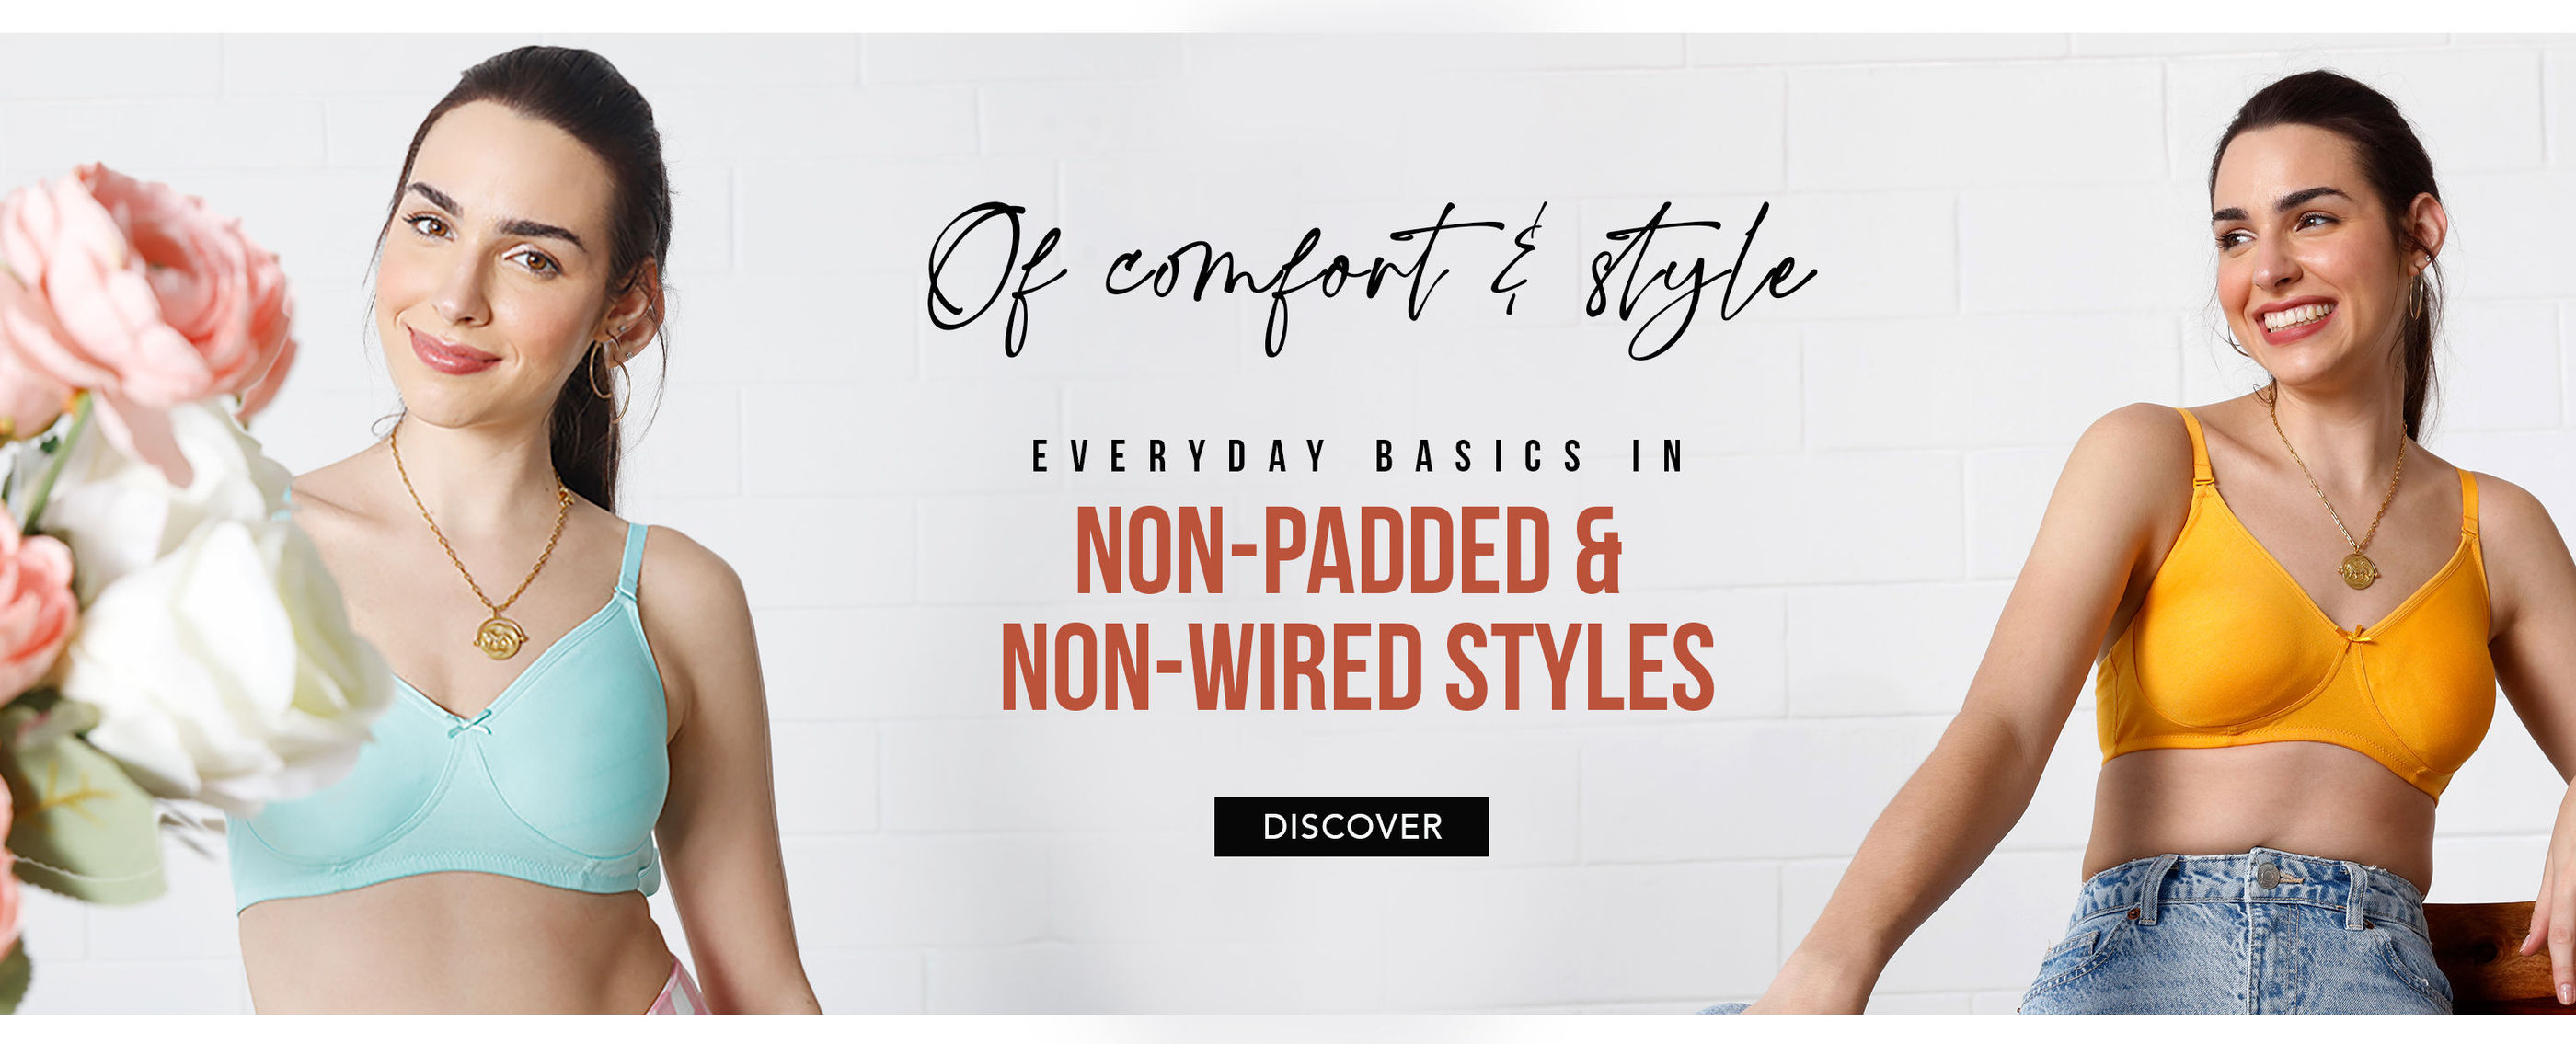 Lingerie Fest - Non Padded Non Wired Coll